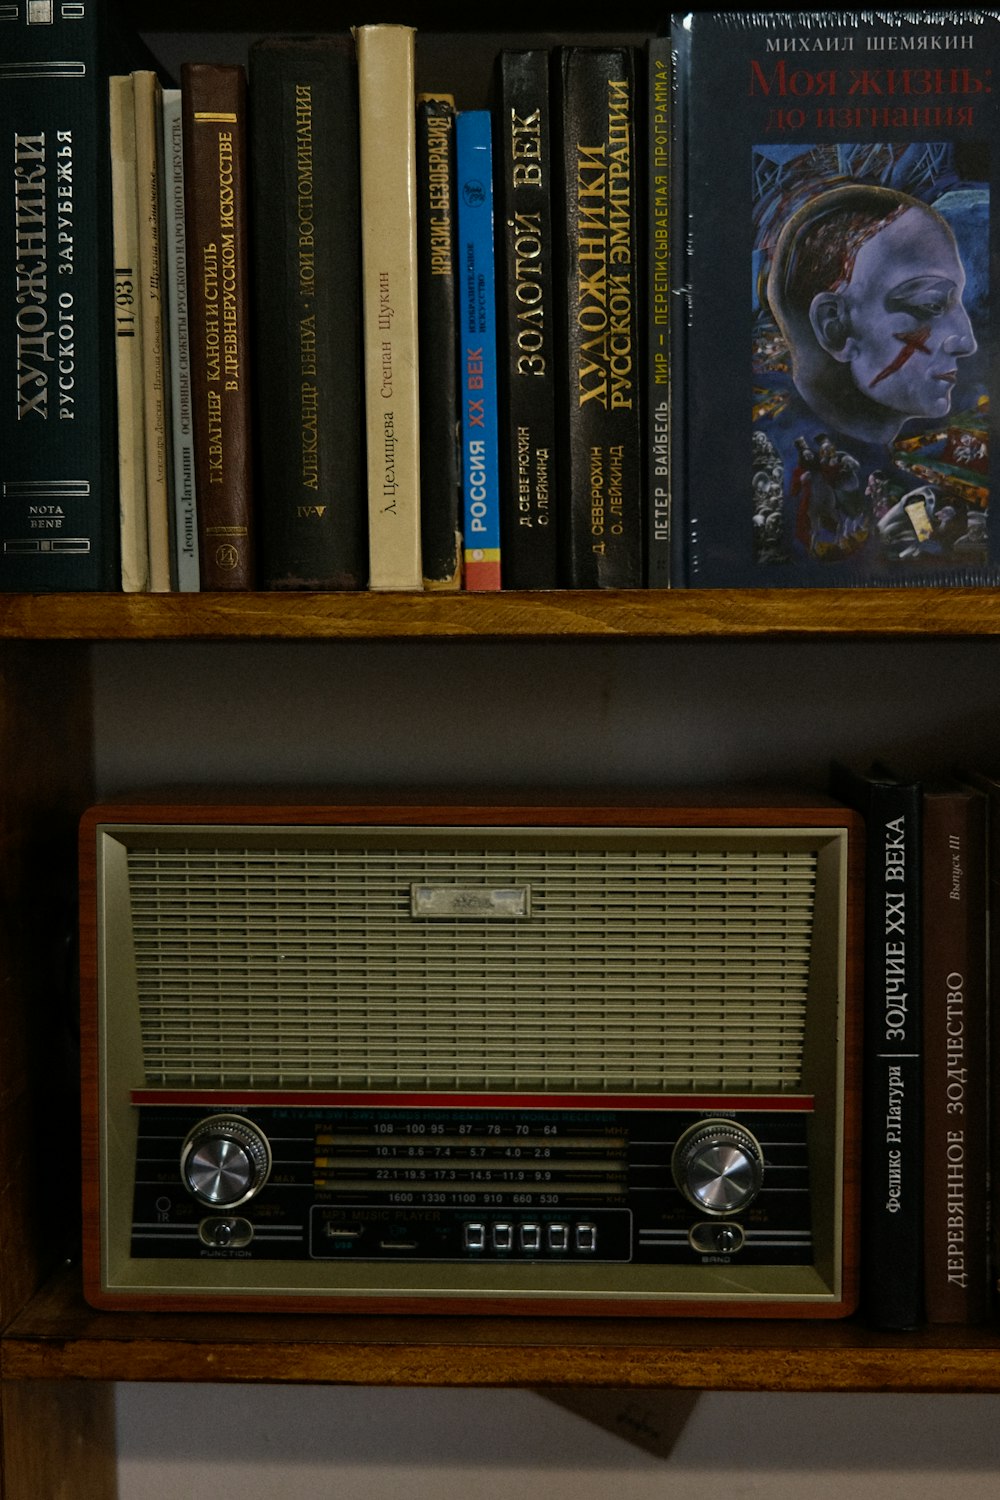 a book shelf with books and a radio on it